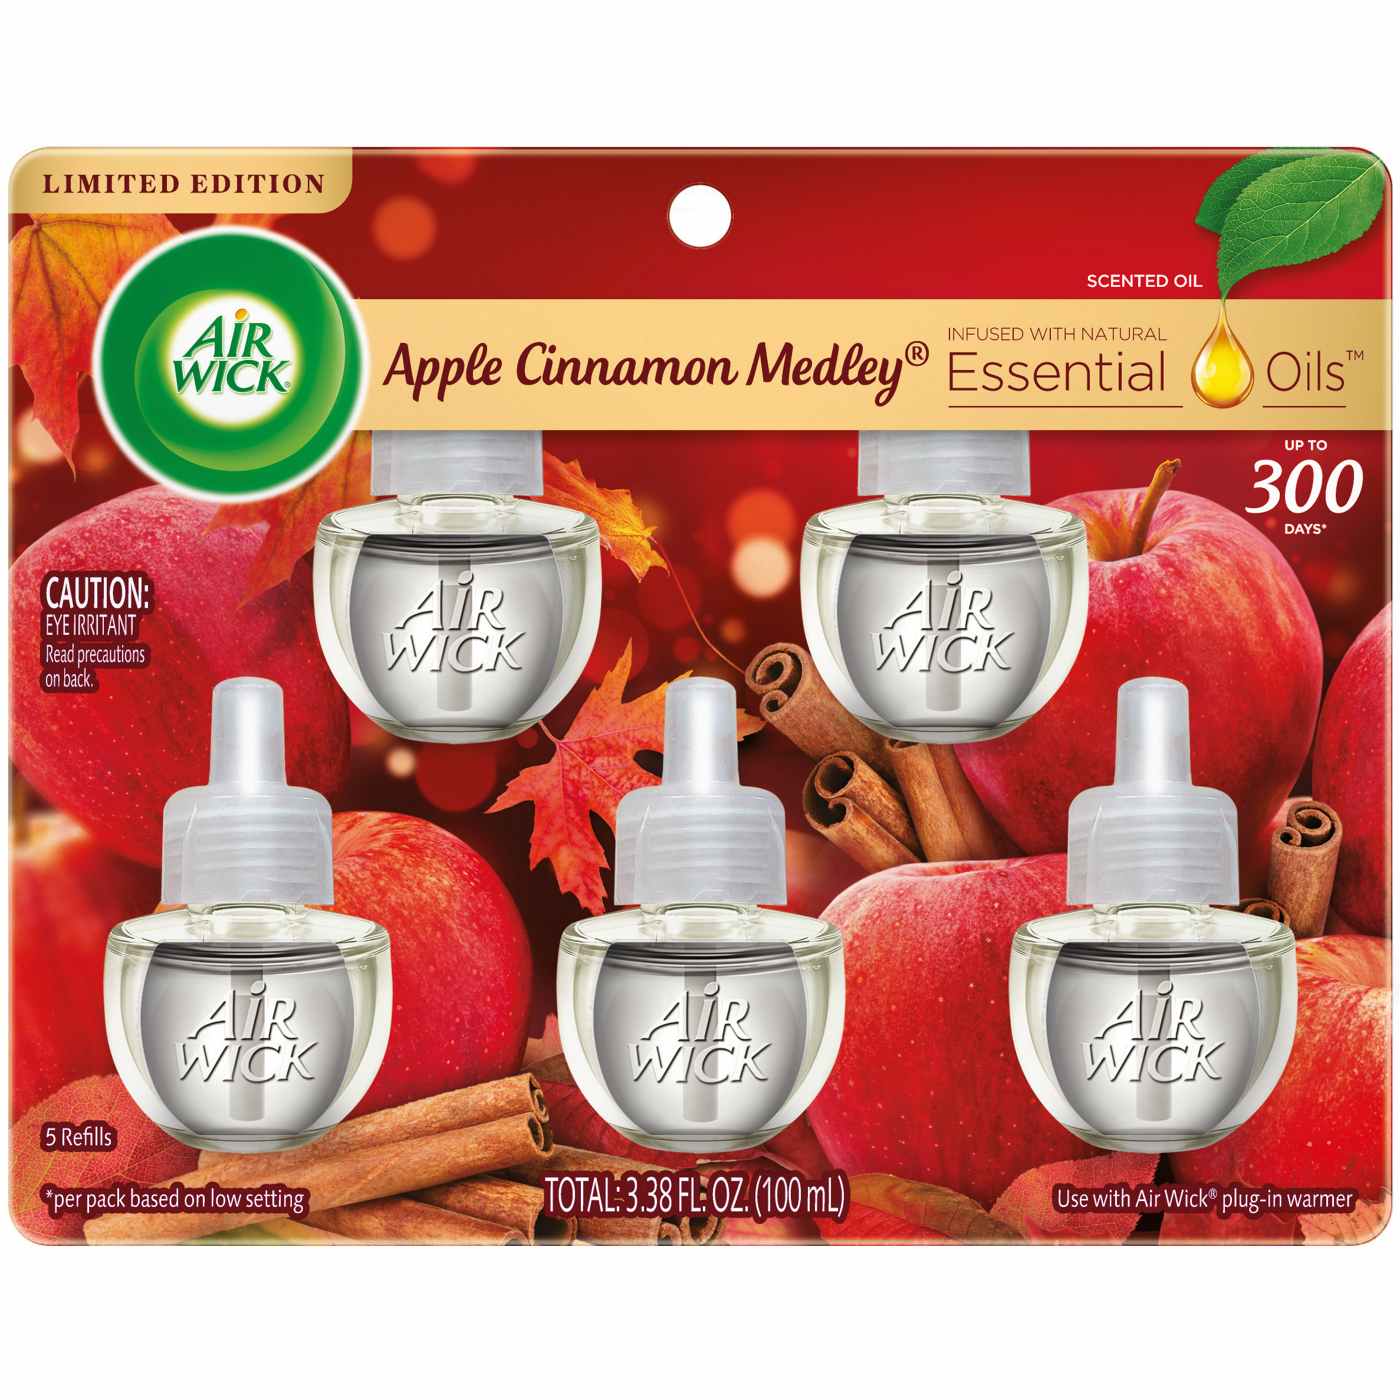 Air Wick Scented Oil Refills - Apple Cinnamon Medley; image 1 of 7